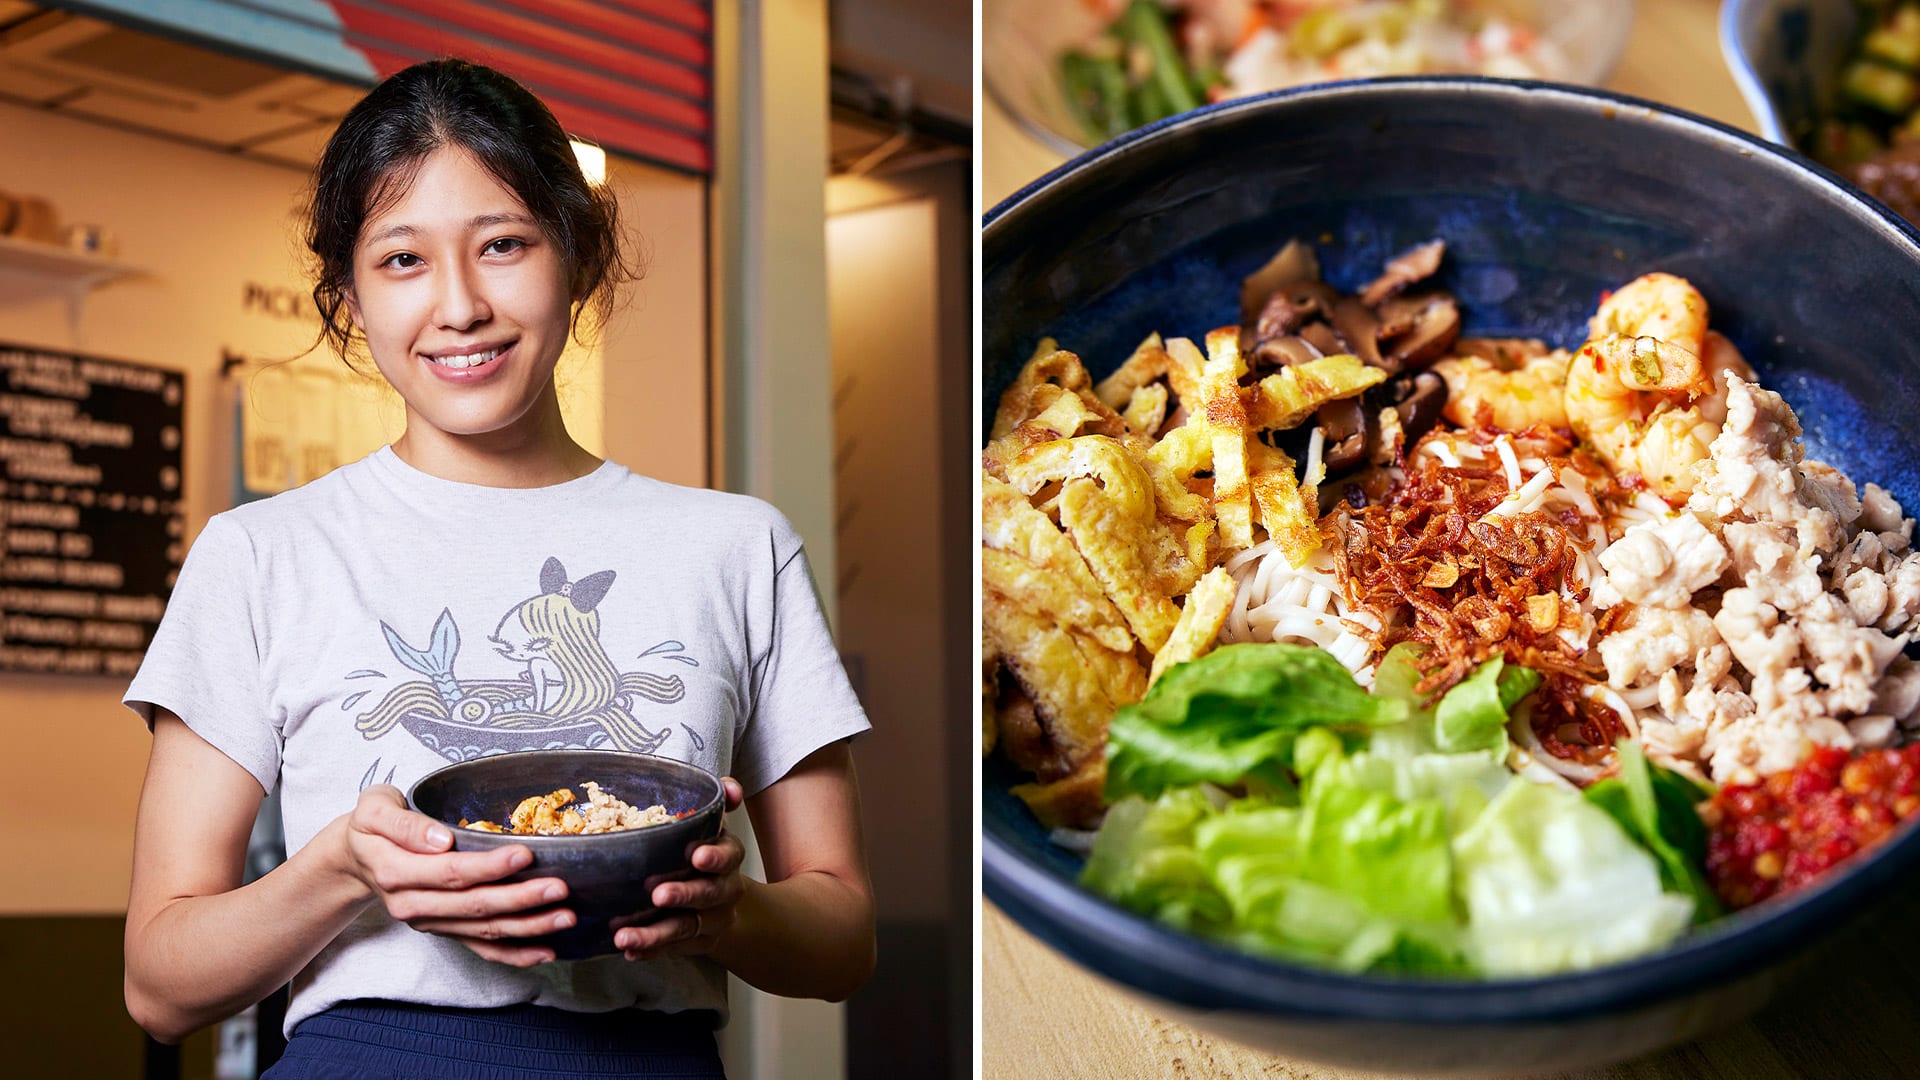 Four-Seat Eatery Serves Hip Heng Hwa Noodles Inspired By “Nai Nai’s” CNY Recipe 